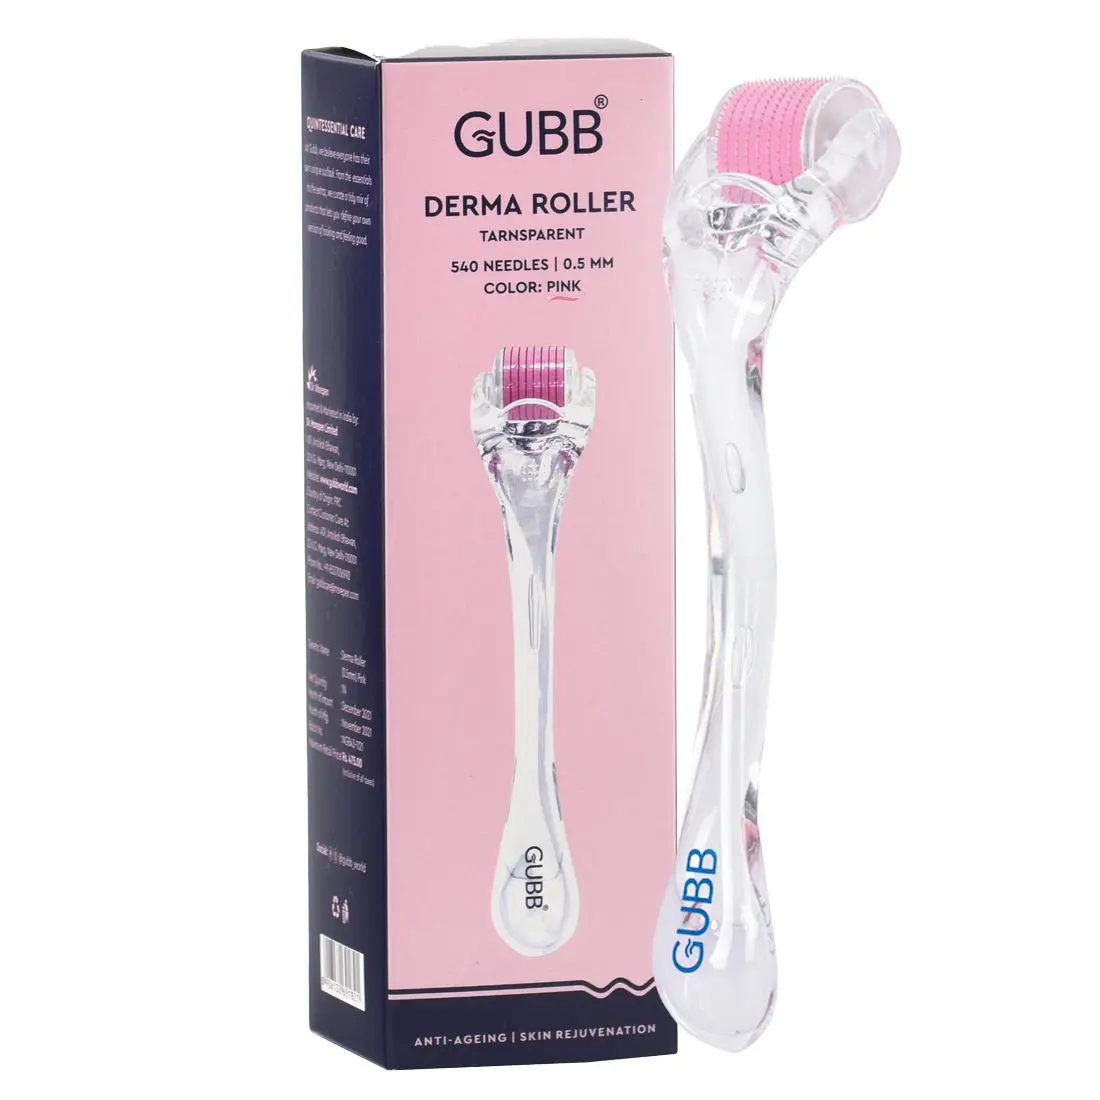 GUBB Derma Roller 0.5mm for Hair Regrowth & Skin Aging, 540 Micro Needles Roller - Transparent Pink